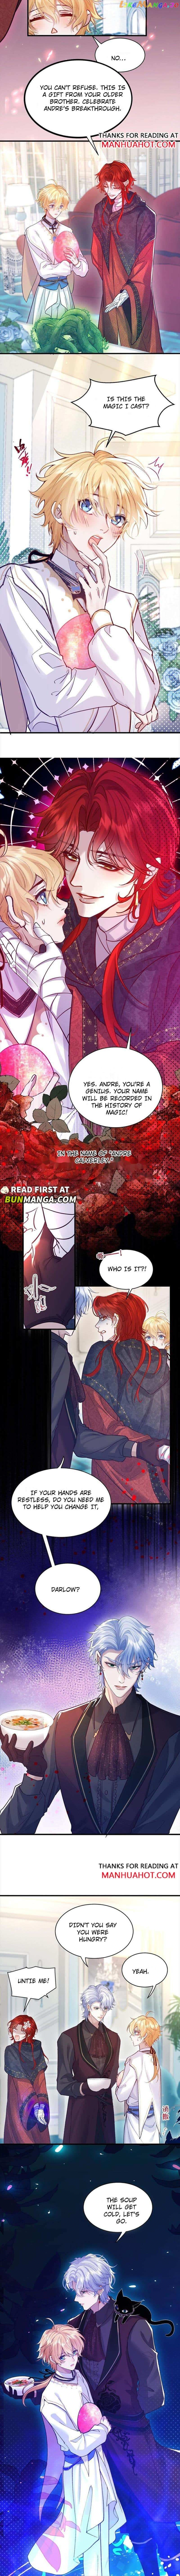 The Devil and His Heirs Chapter 13 - Page 3